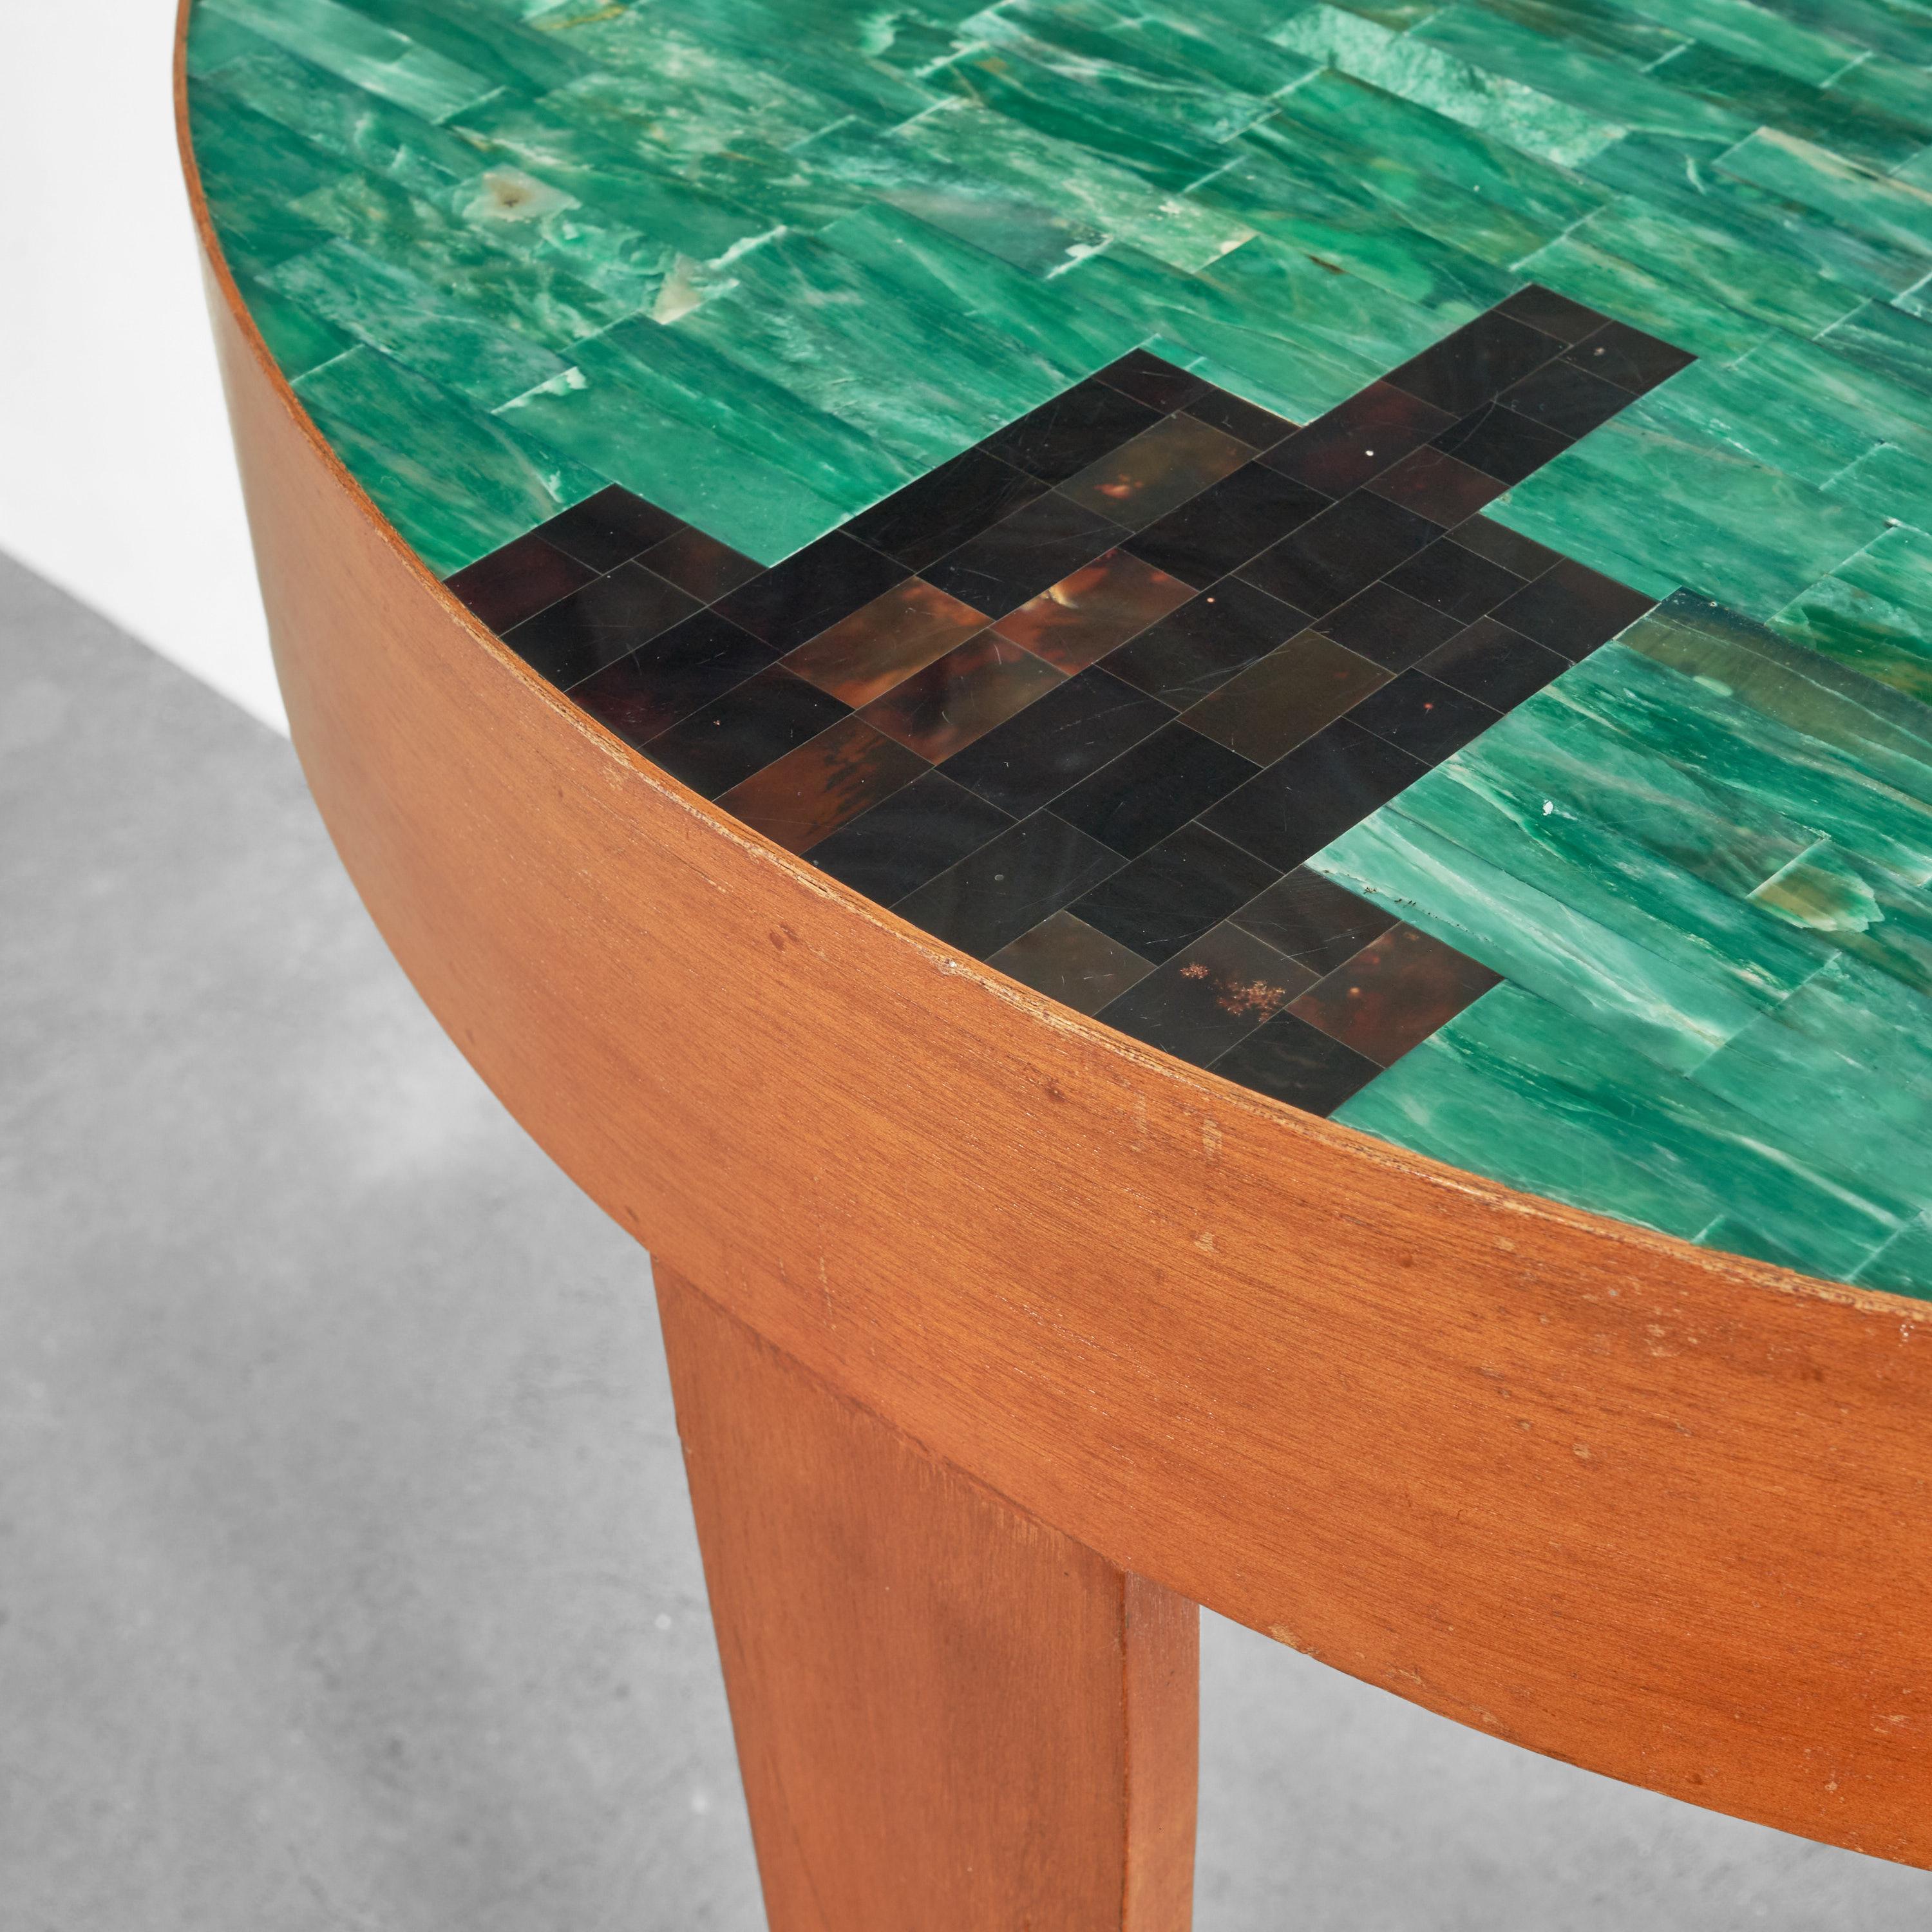 20th Century Art Deco Demi Lune Table in Malachite and Brown Shell Mosaic and Wood 1930s For Sale